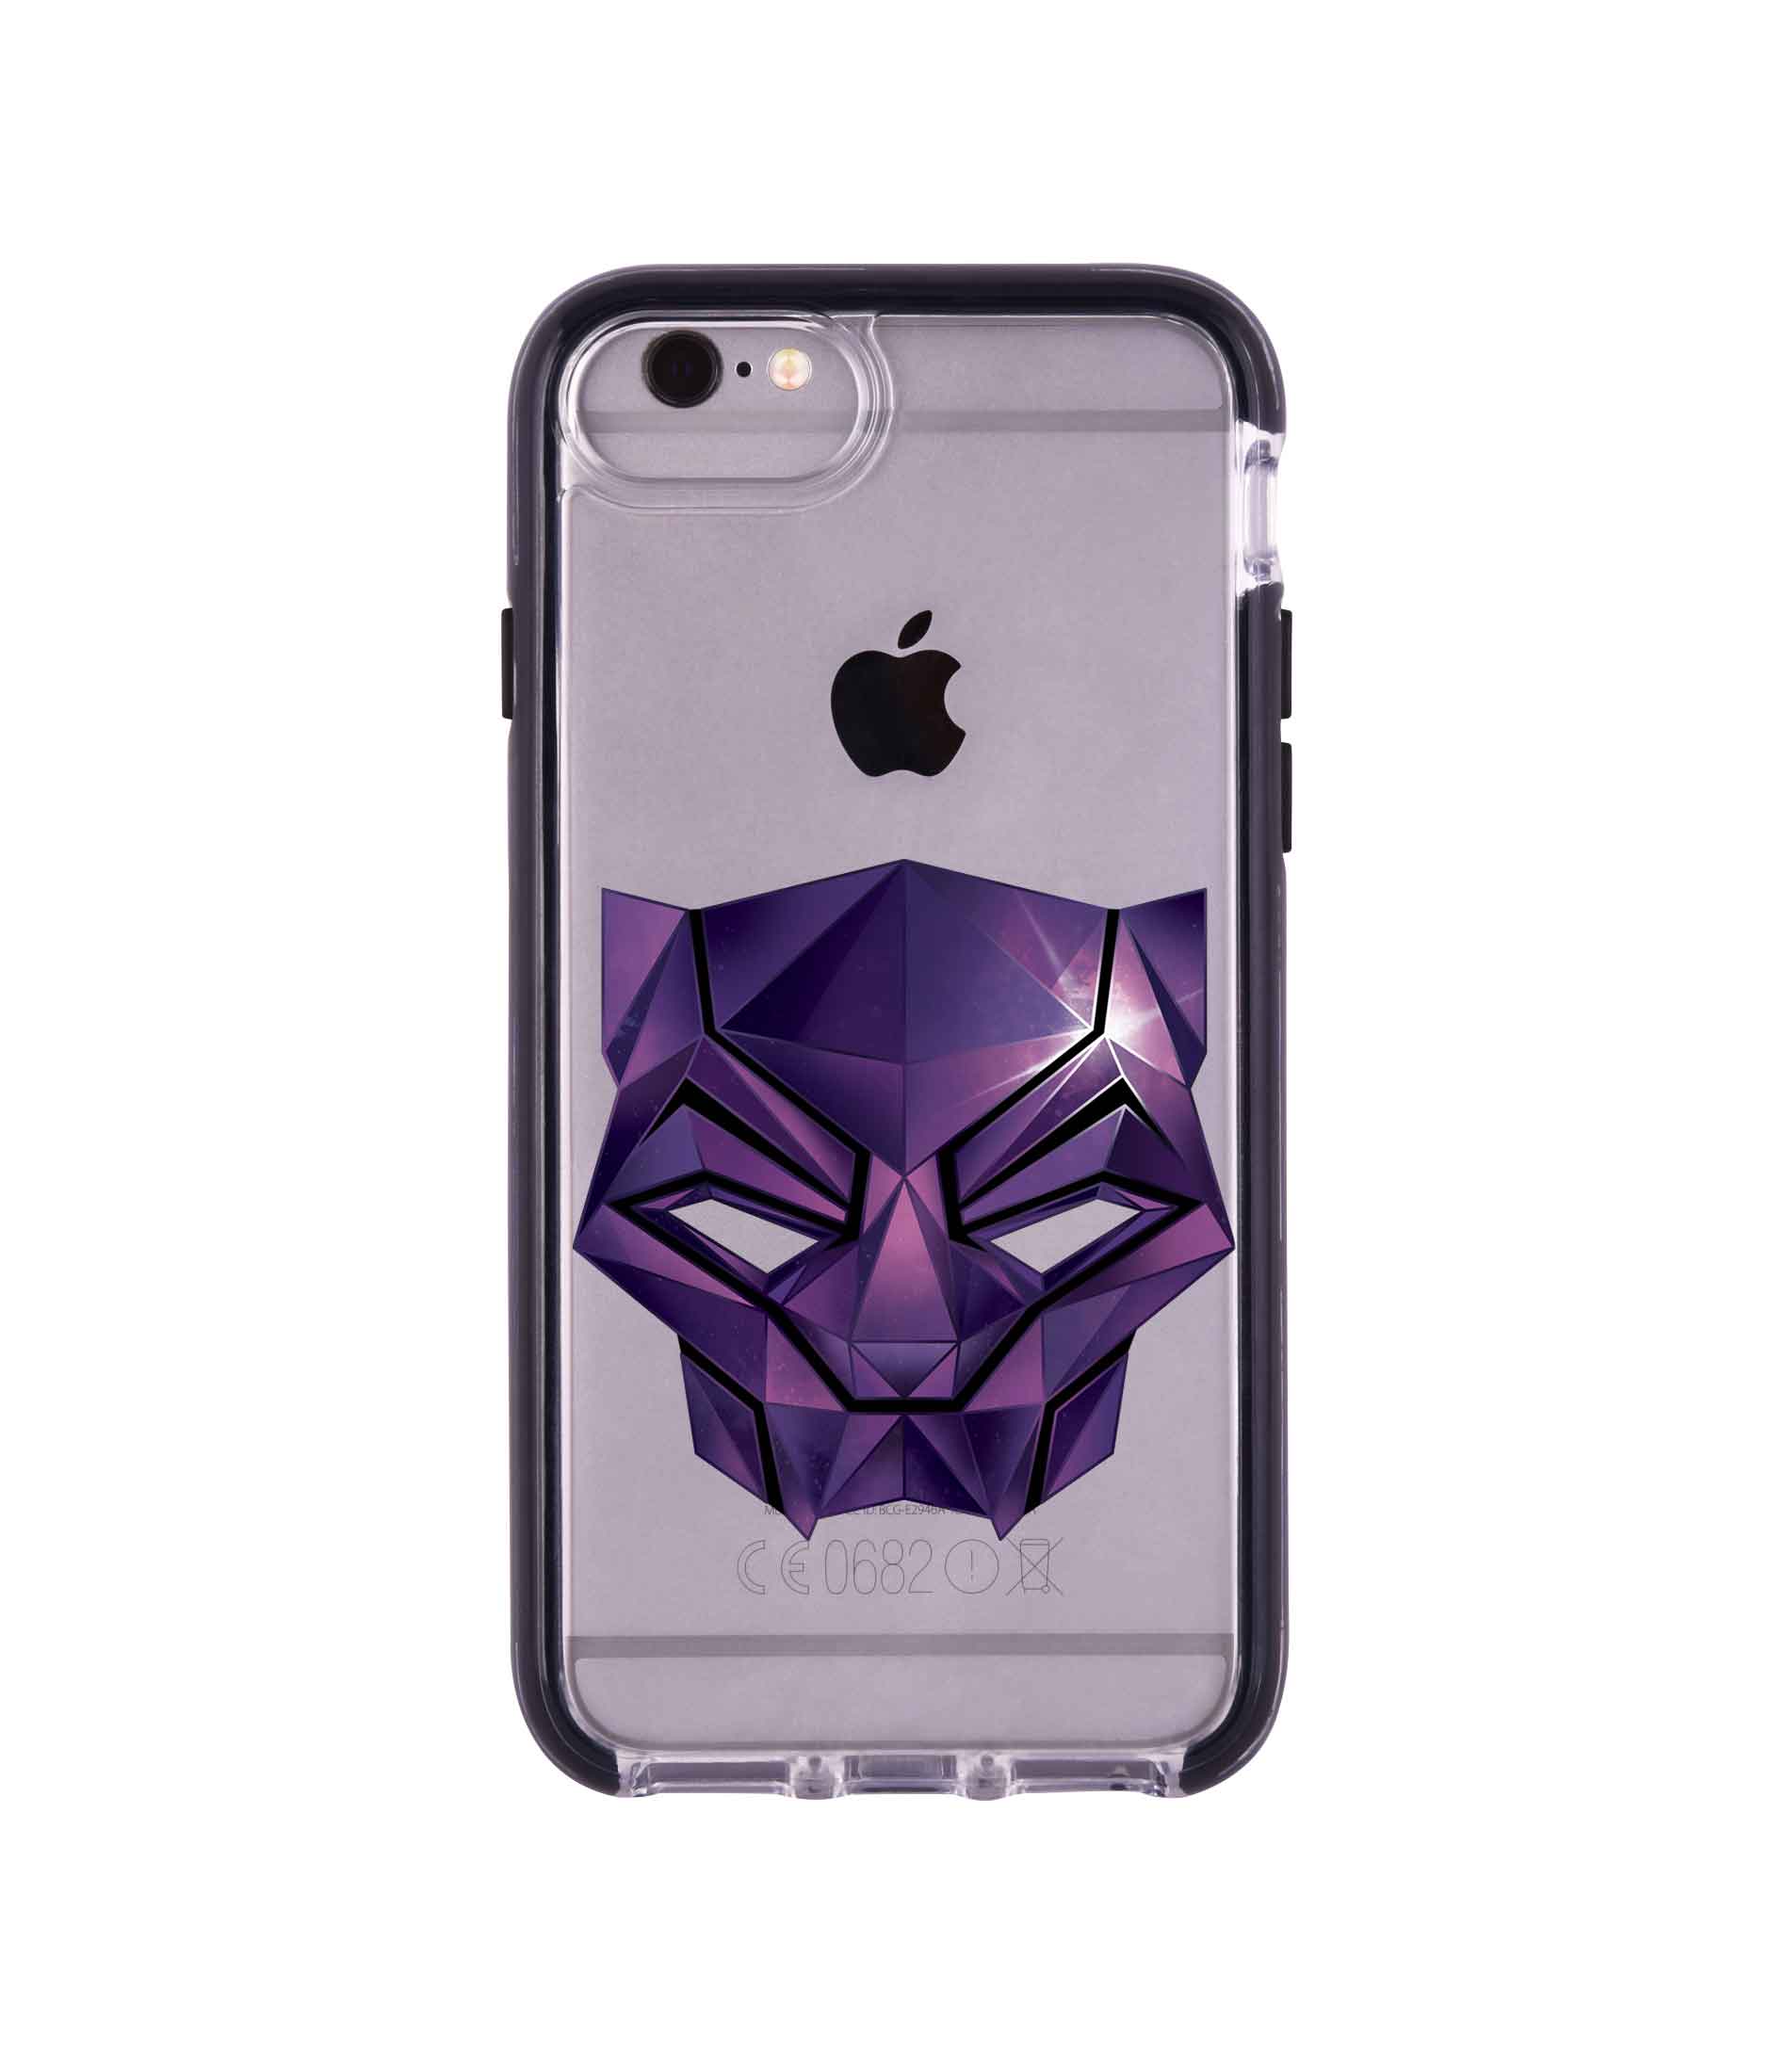 Black Panther Logo - Extreme Phone Case for iPhone 6